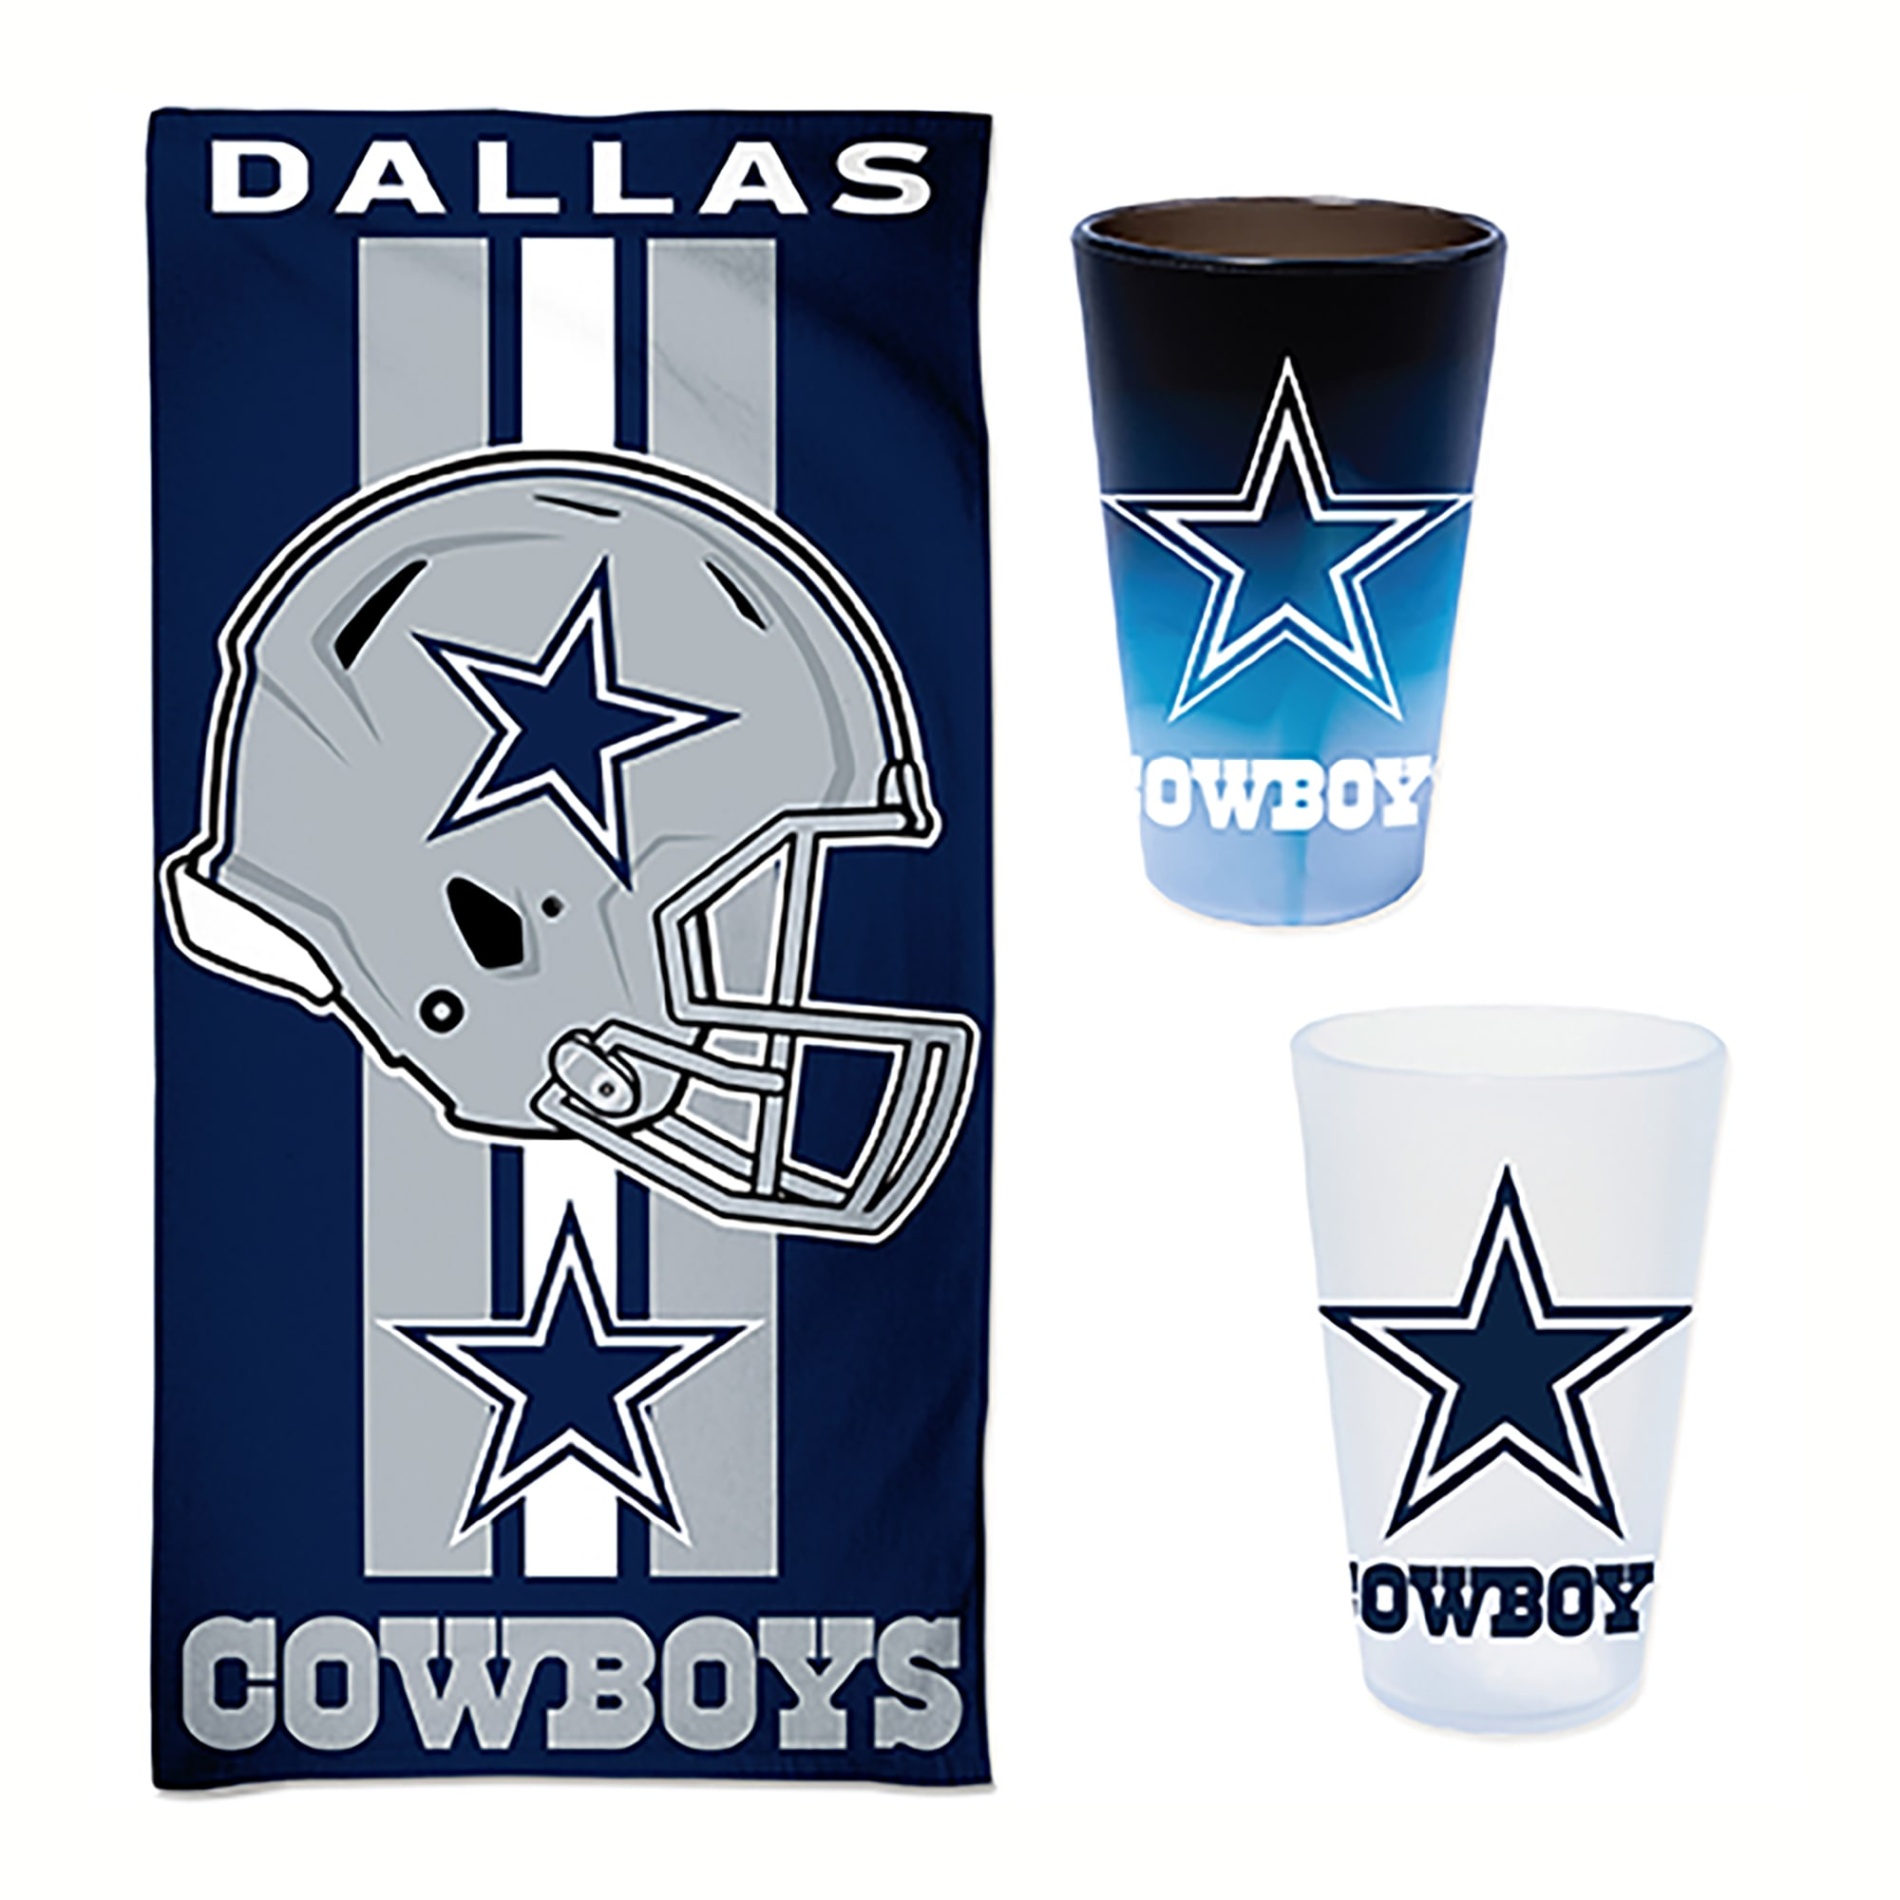 Dress Up Your Game Day Look With Stylish Dallas Cowboys Accessories!